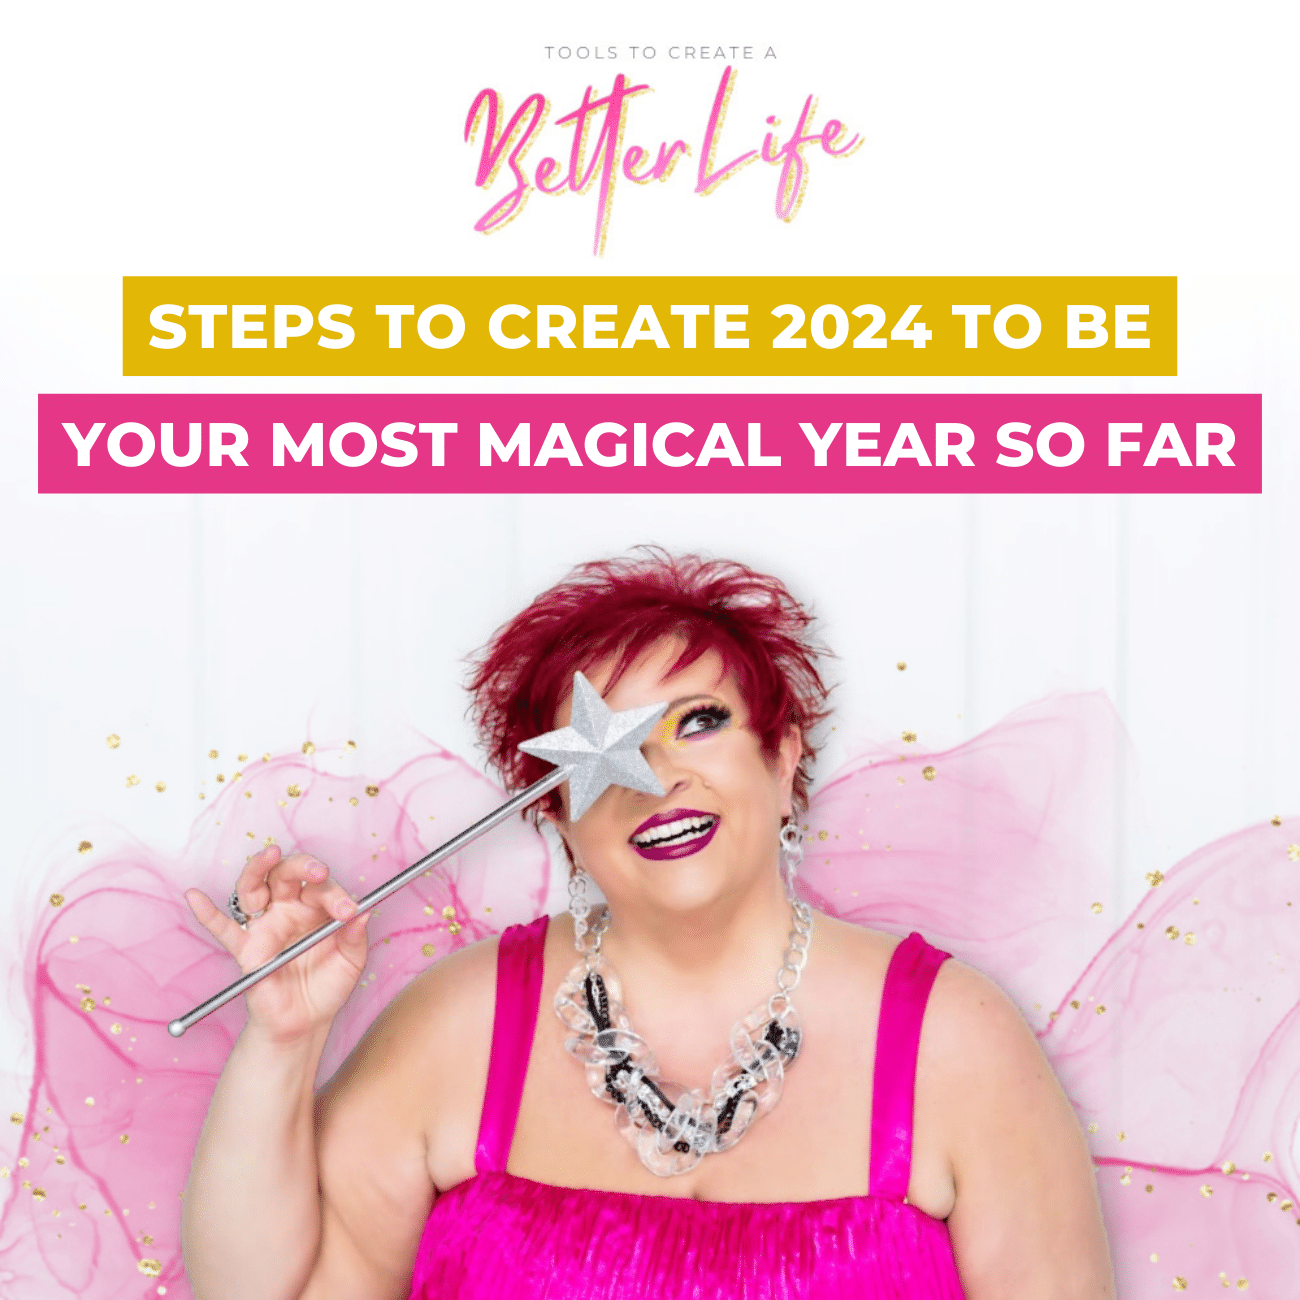 Steps to Create 2024 to Be Your Most Magical Year So Far